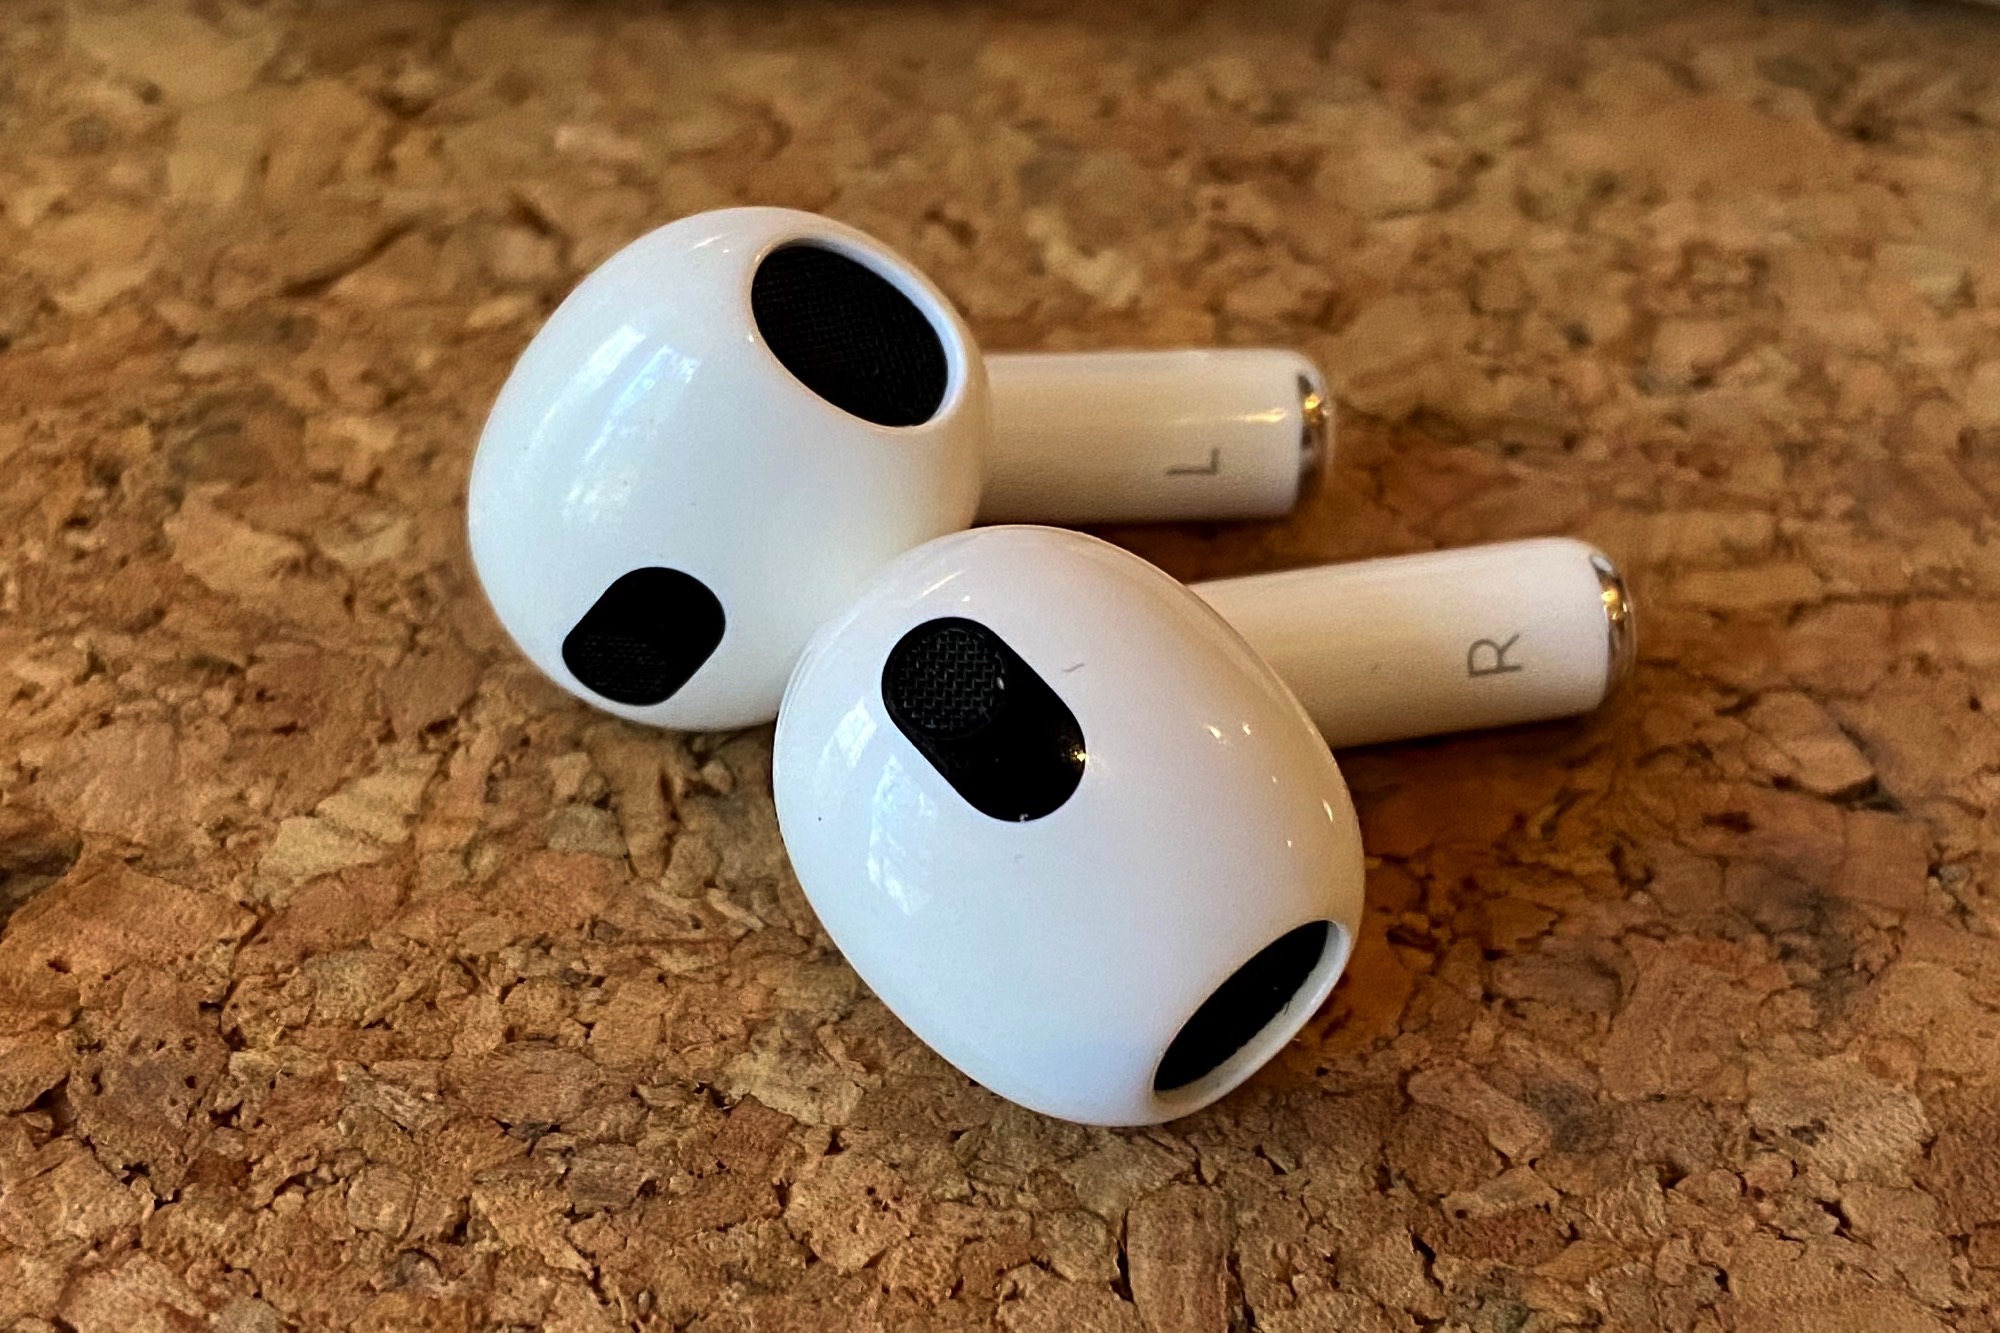  How to clean your AirPods, AirPods Pro, or AirPod Max safely and effectively